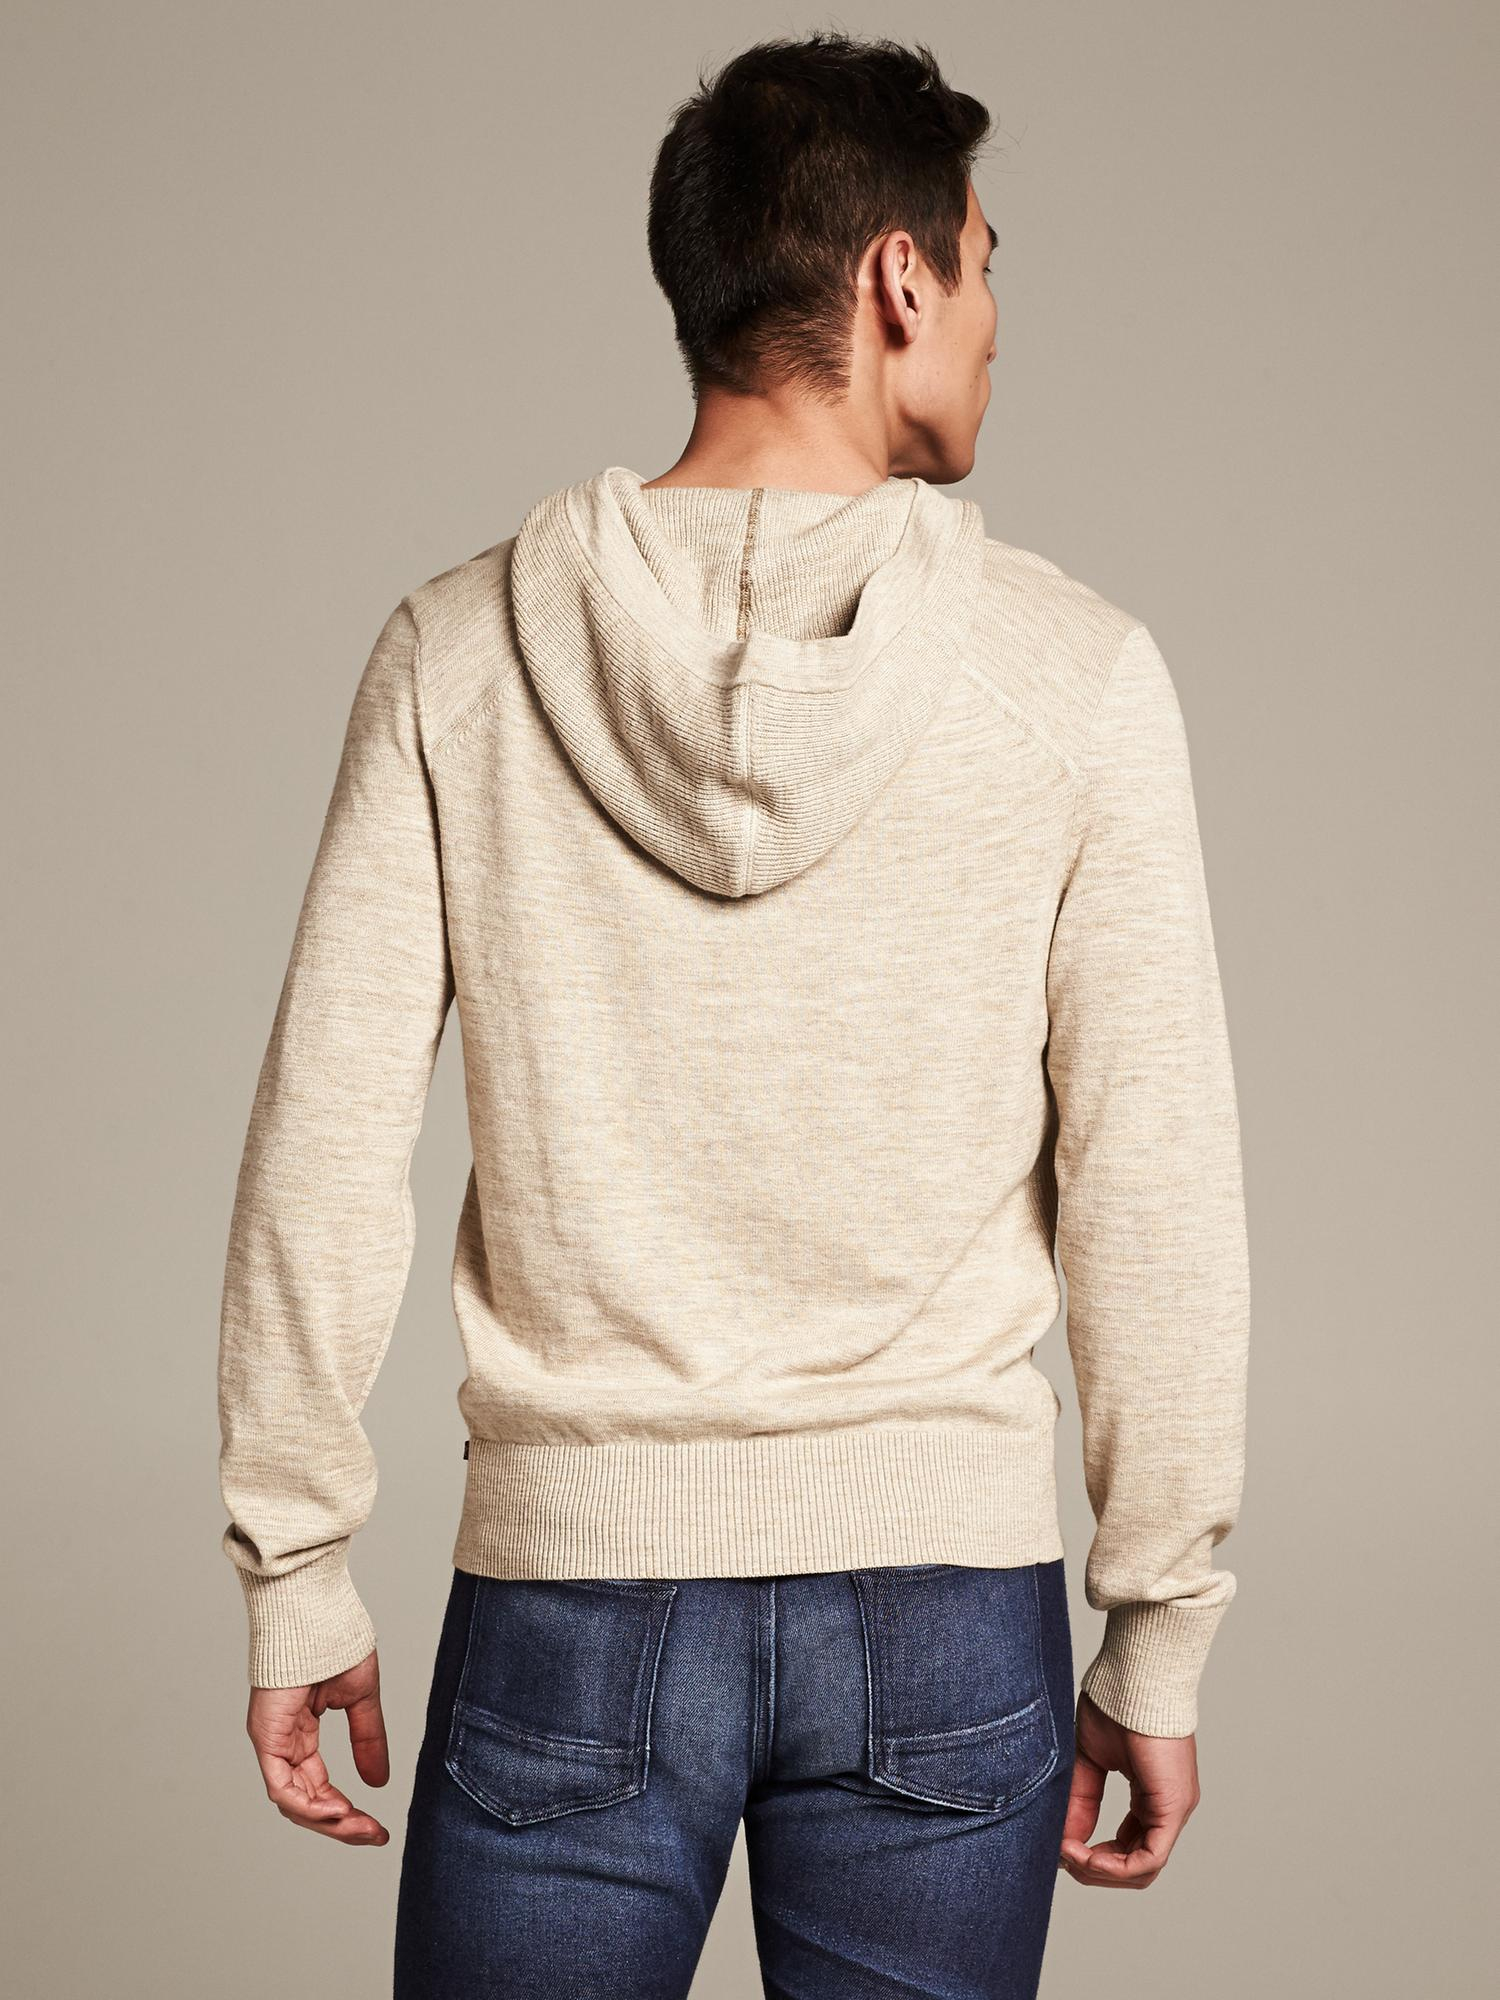 Lyst - Banana Republic Heritage Rib-Knit Hooded Pullover in Natural for Men